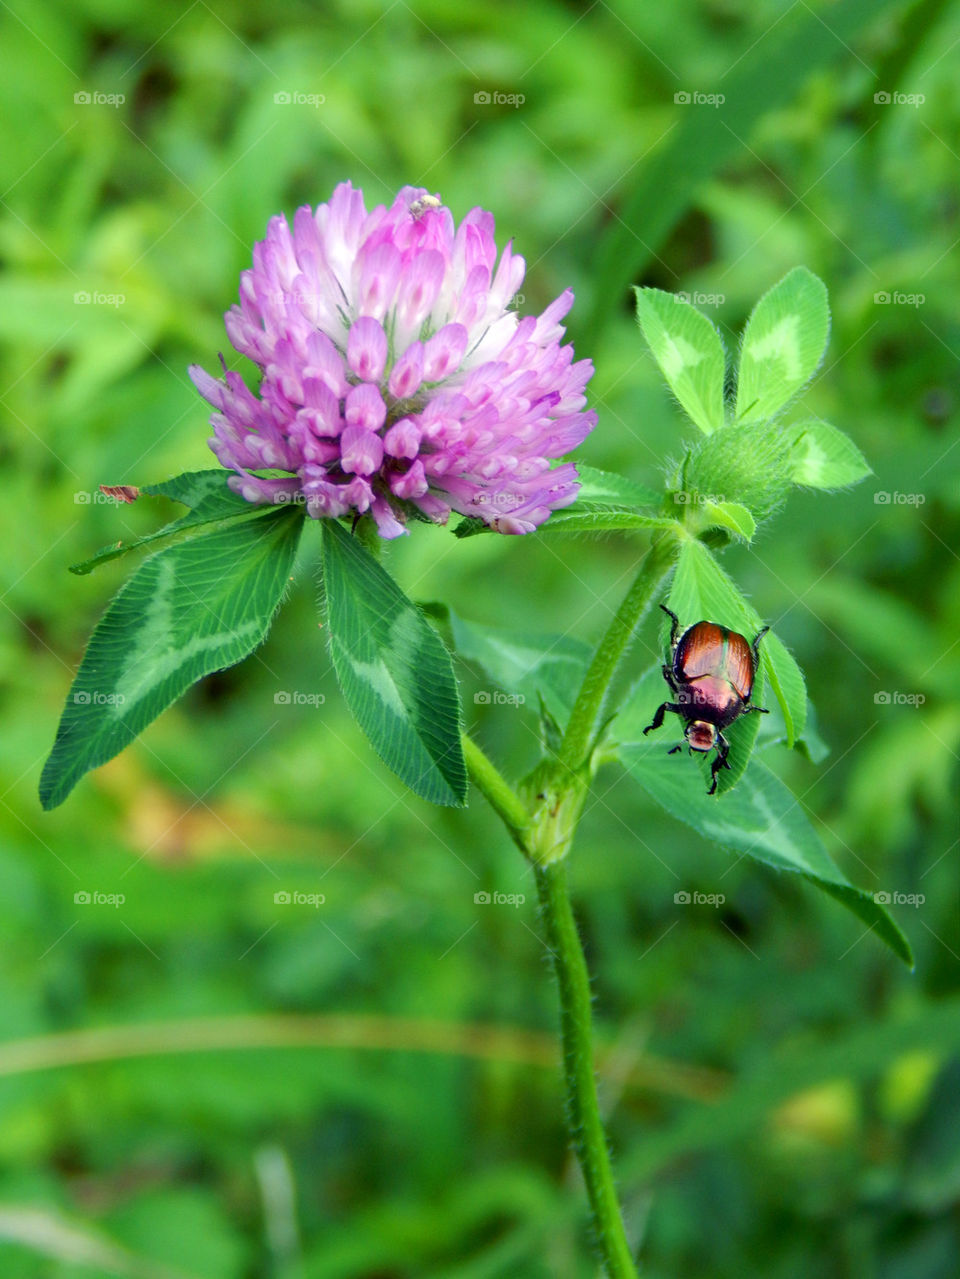 Beetle and flower